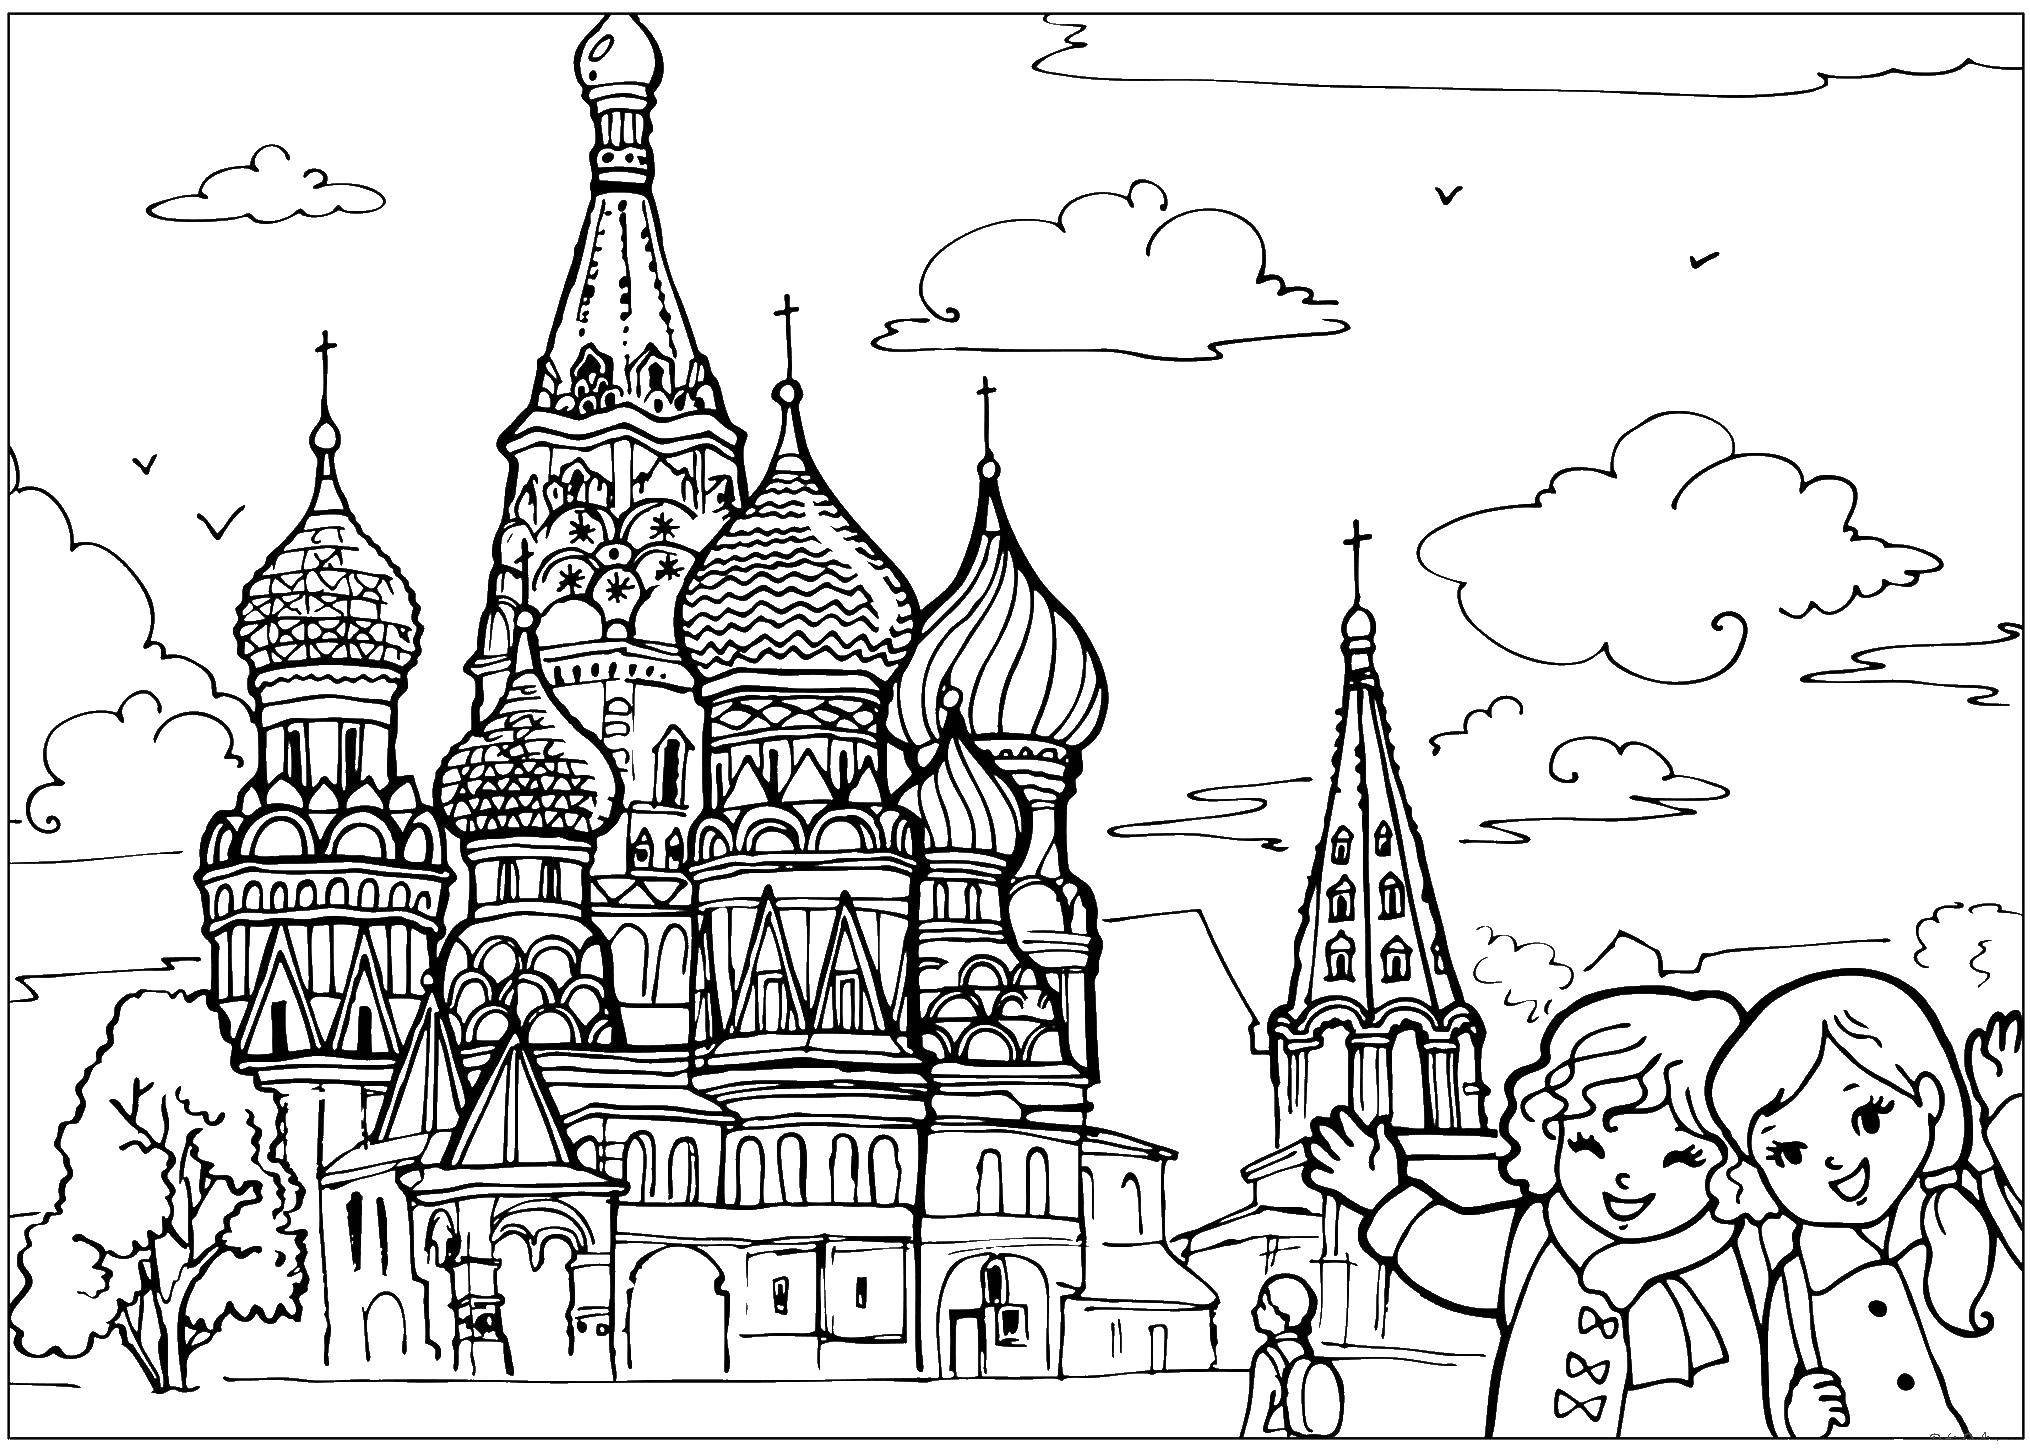 Coloring Children at the Kremlin. Category Russia . Tags:  Russia, The Kremlin.